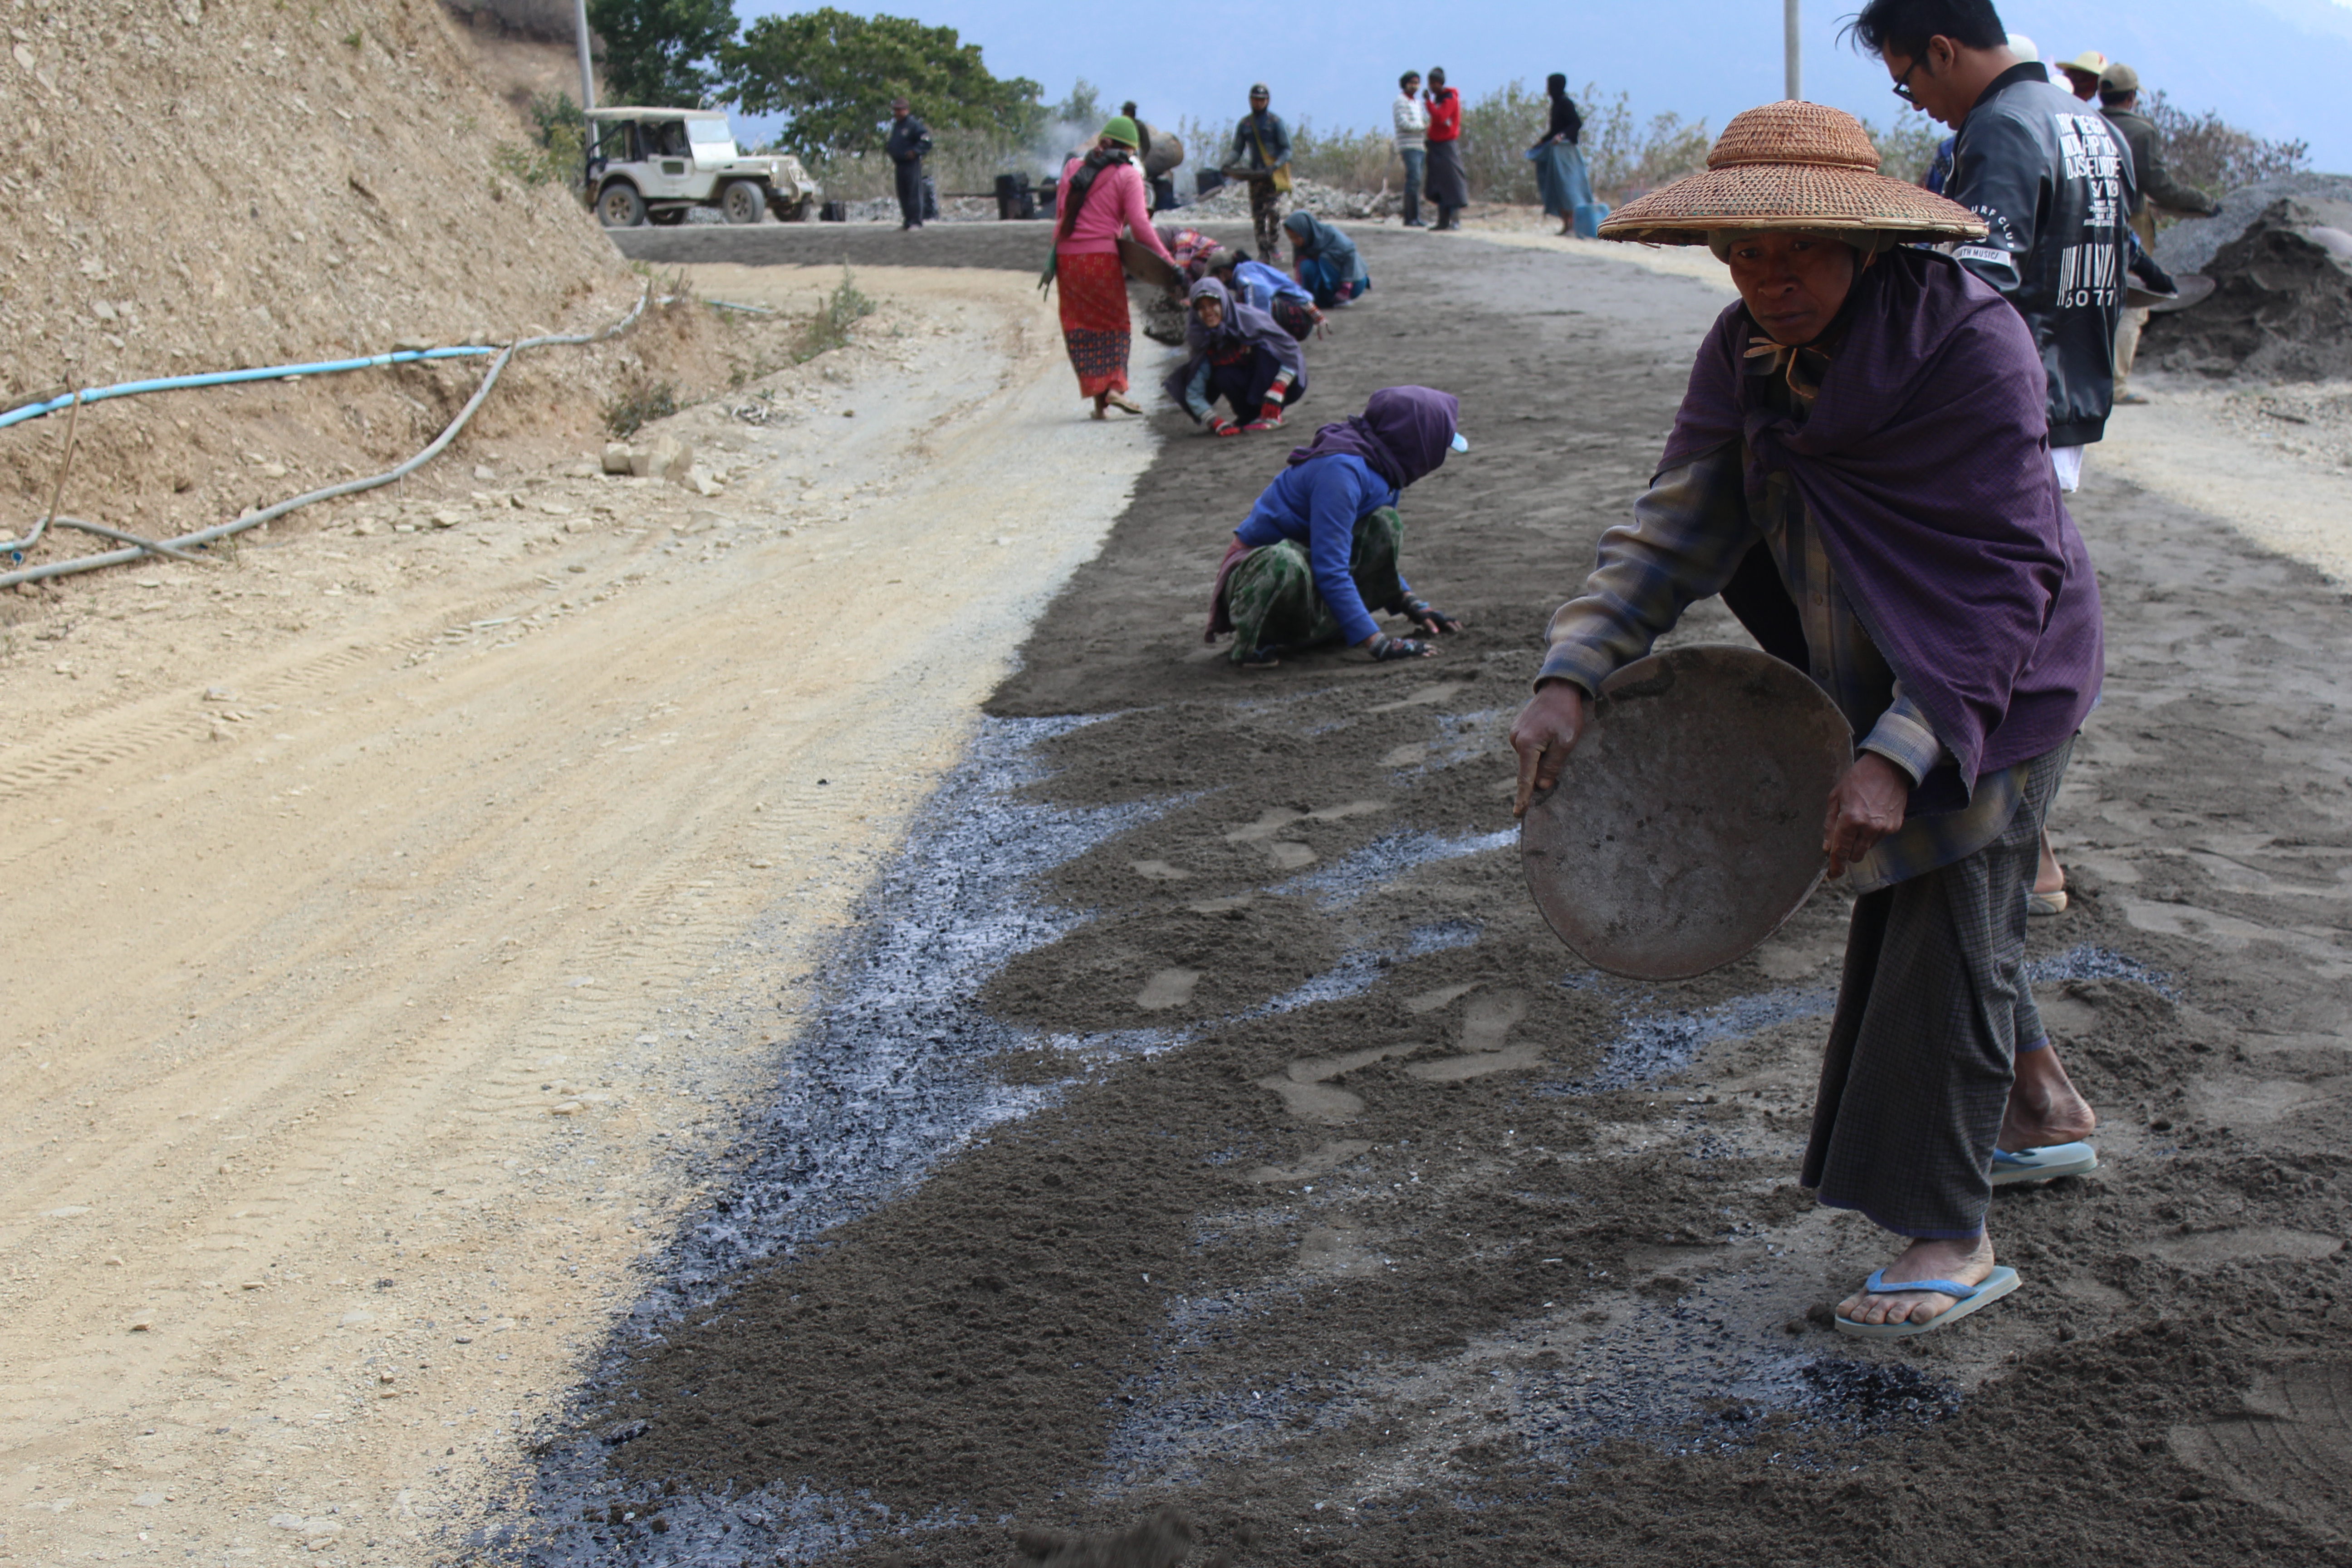 Road workers in Chin State. Photo: Jacob Goldberg